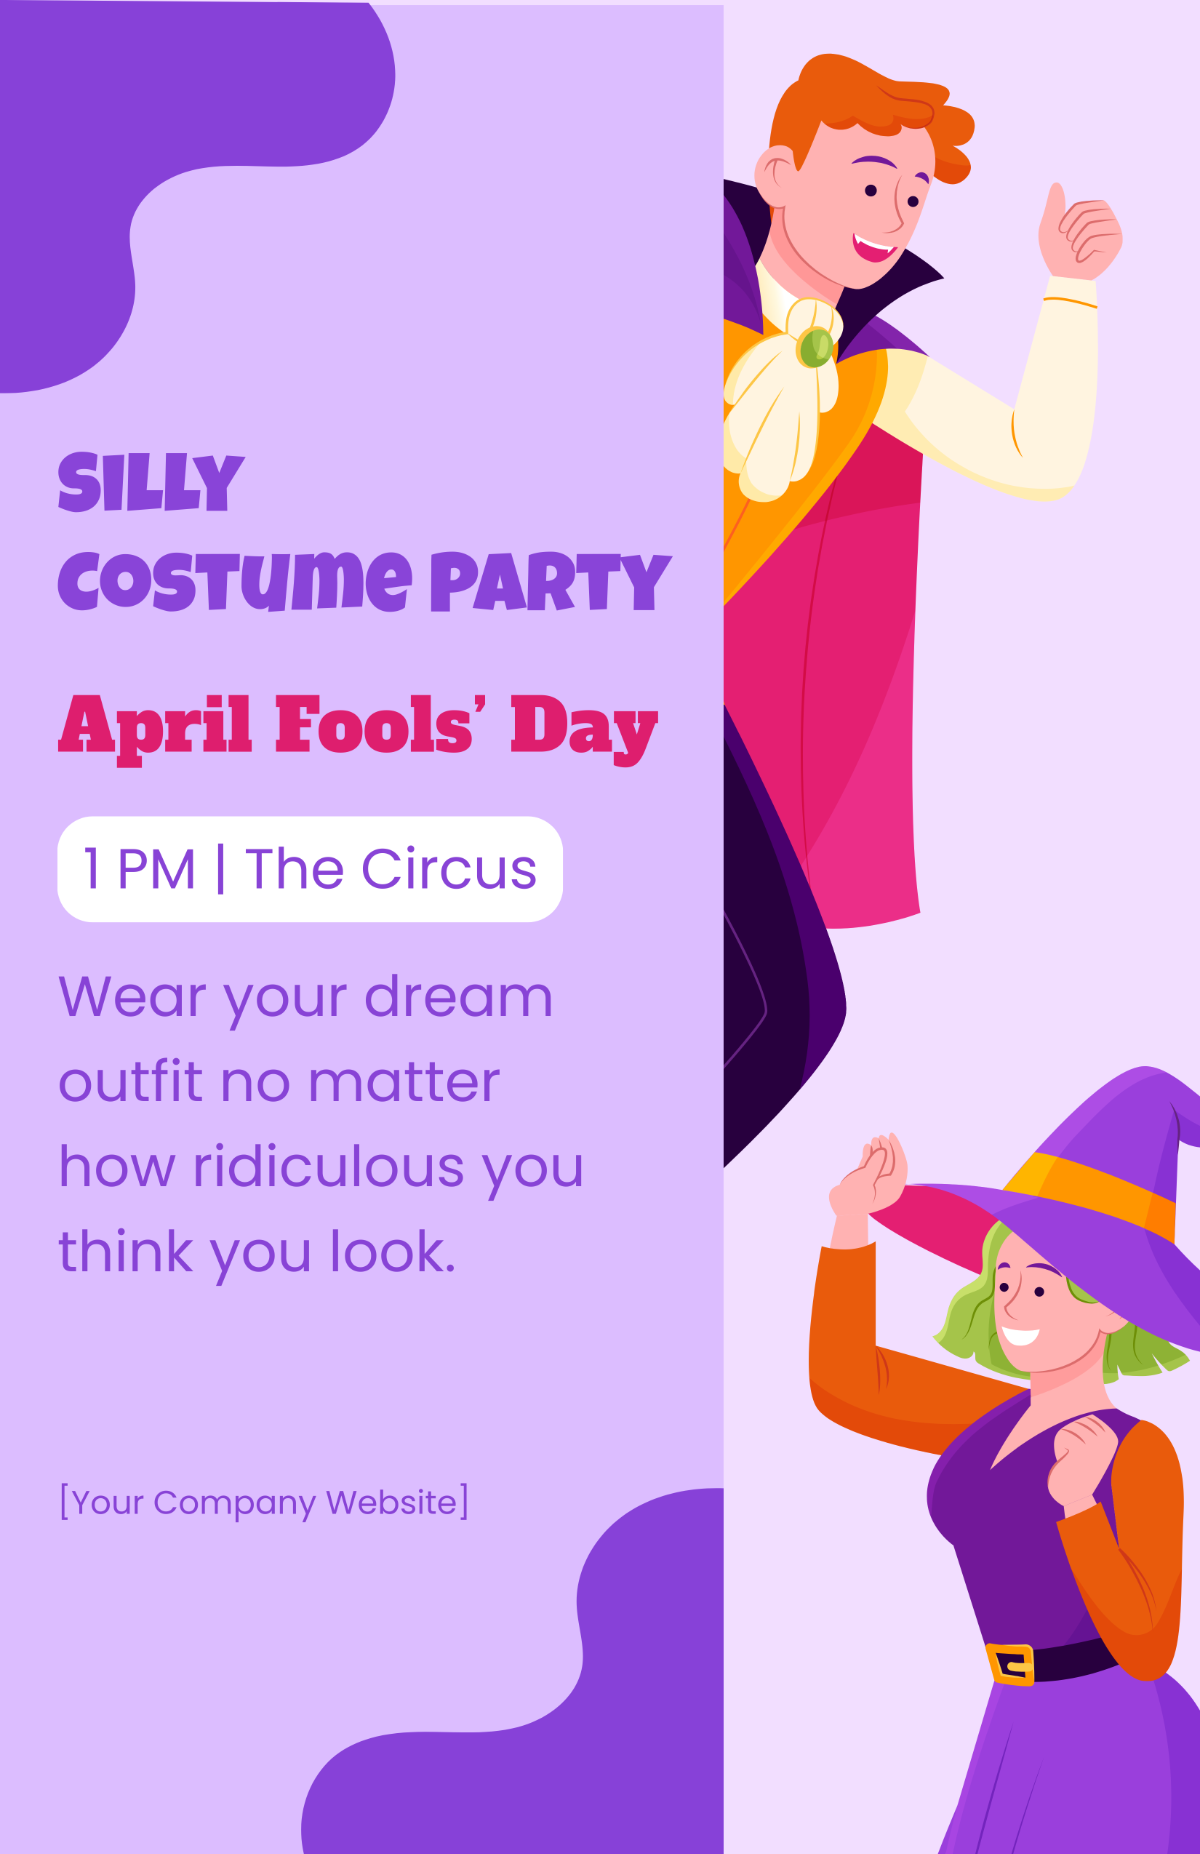 Free Event April Fools’ Day Poster Template